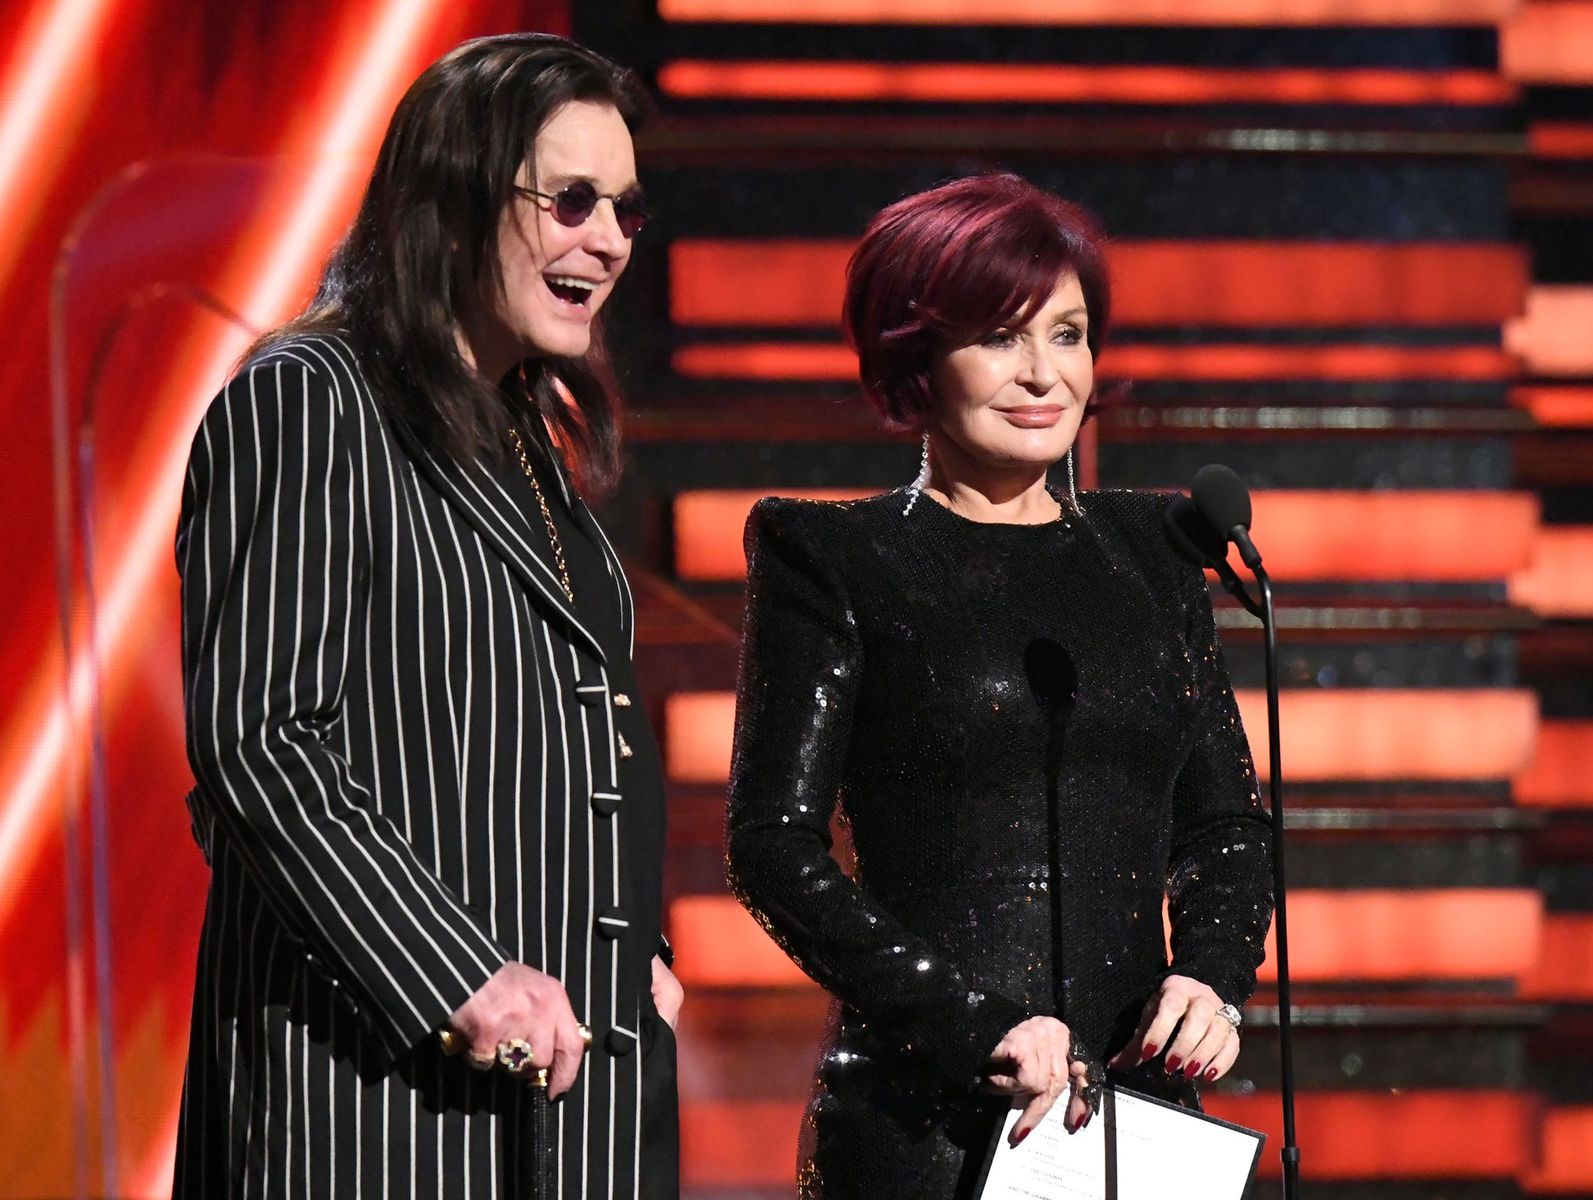 Ozzy and Sharon Osbourne speak onstage during the 62nd Annual Grammy Awards on January 26, 2020, in Los Angeles, California | Photo: Jeff Kravitz/FilmMagic/Getty Images